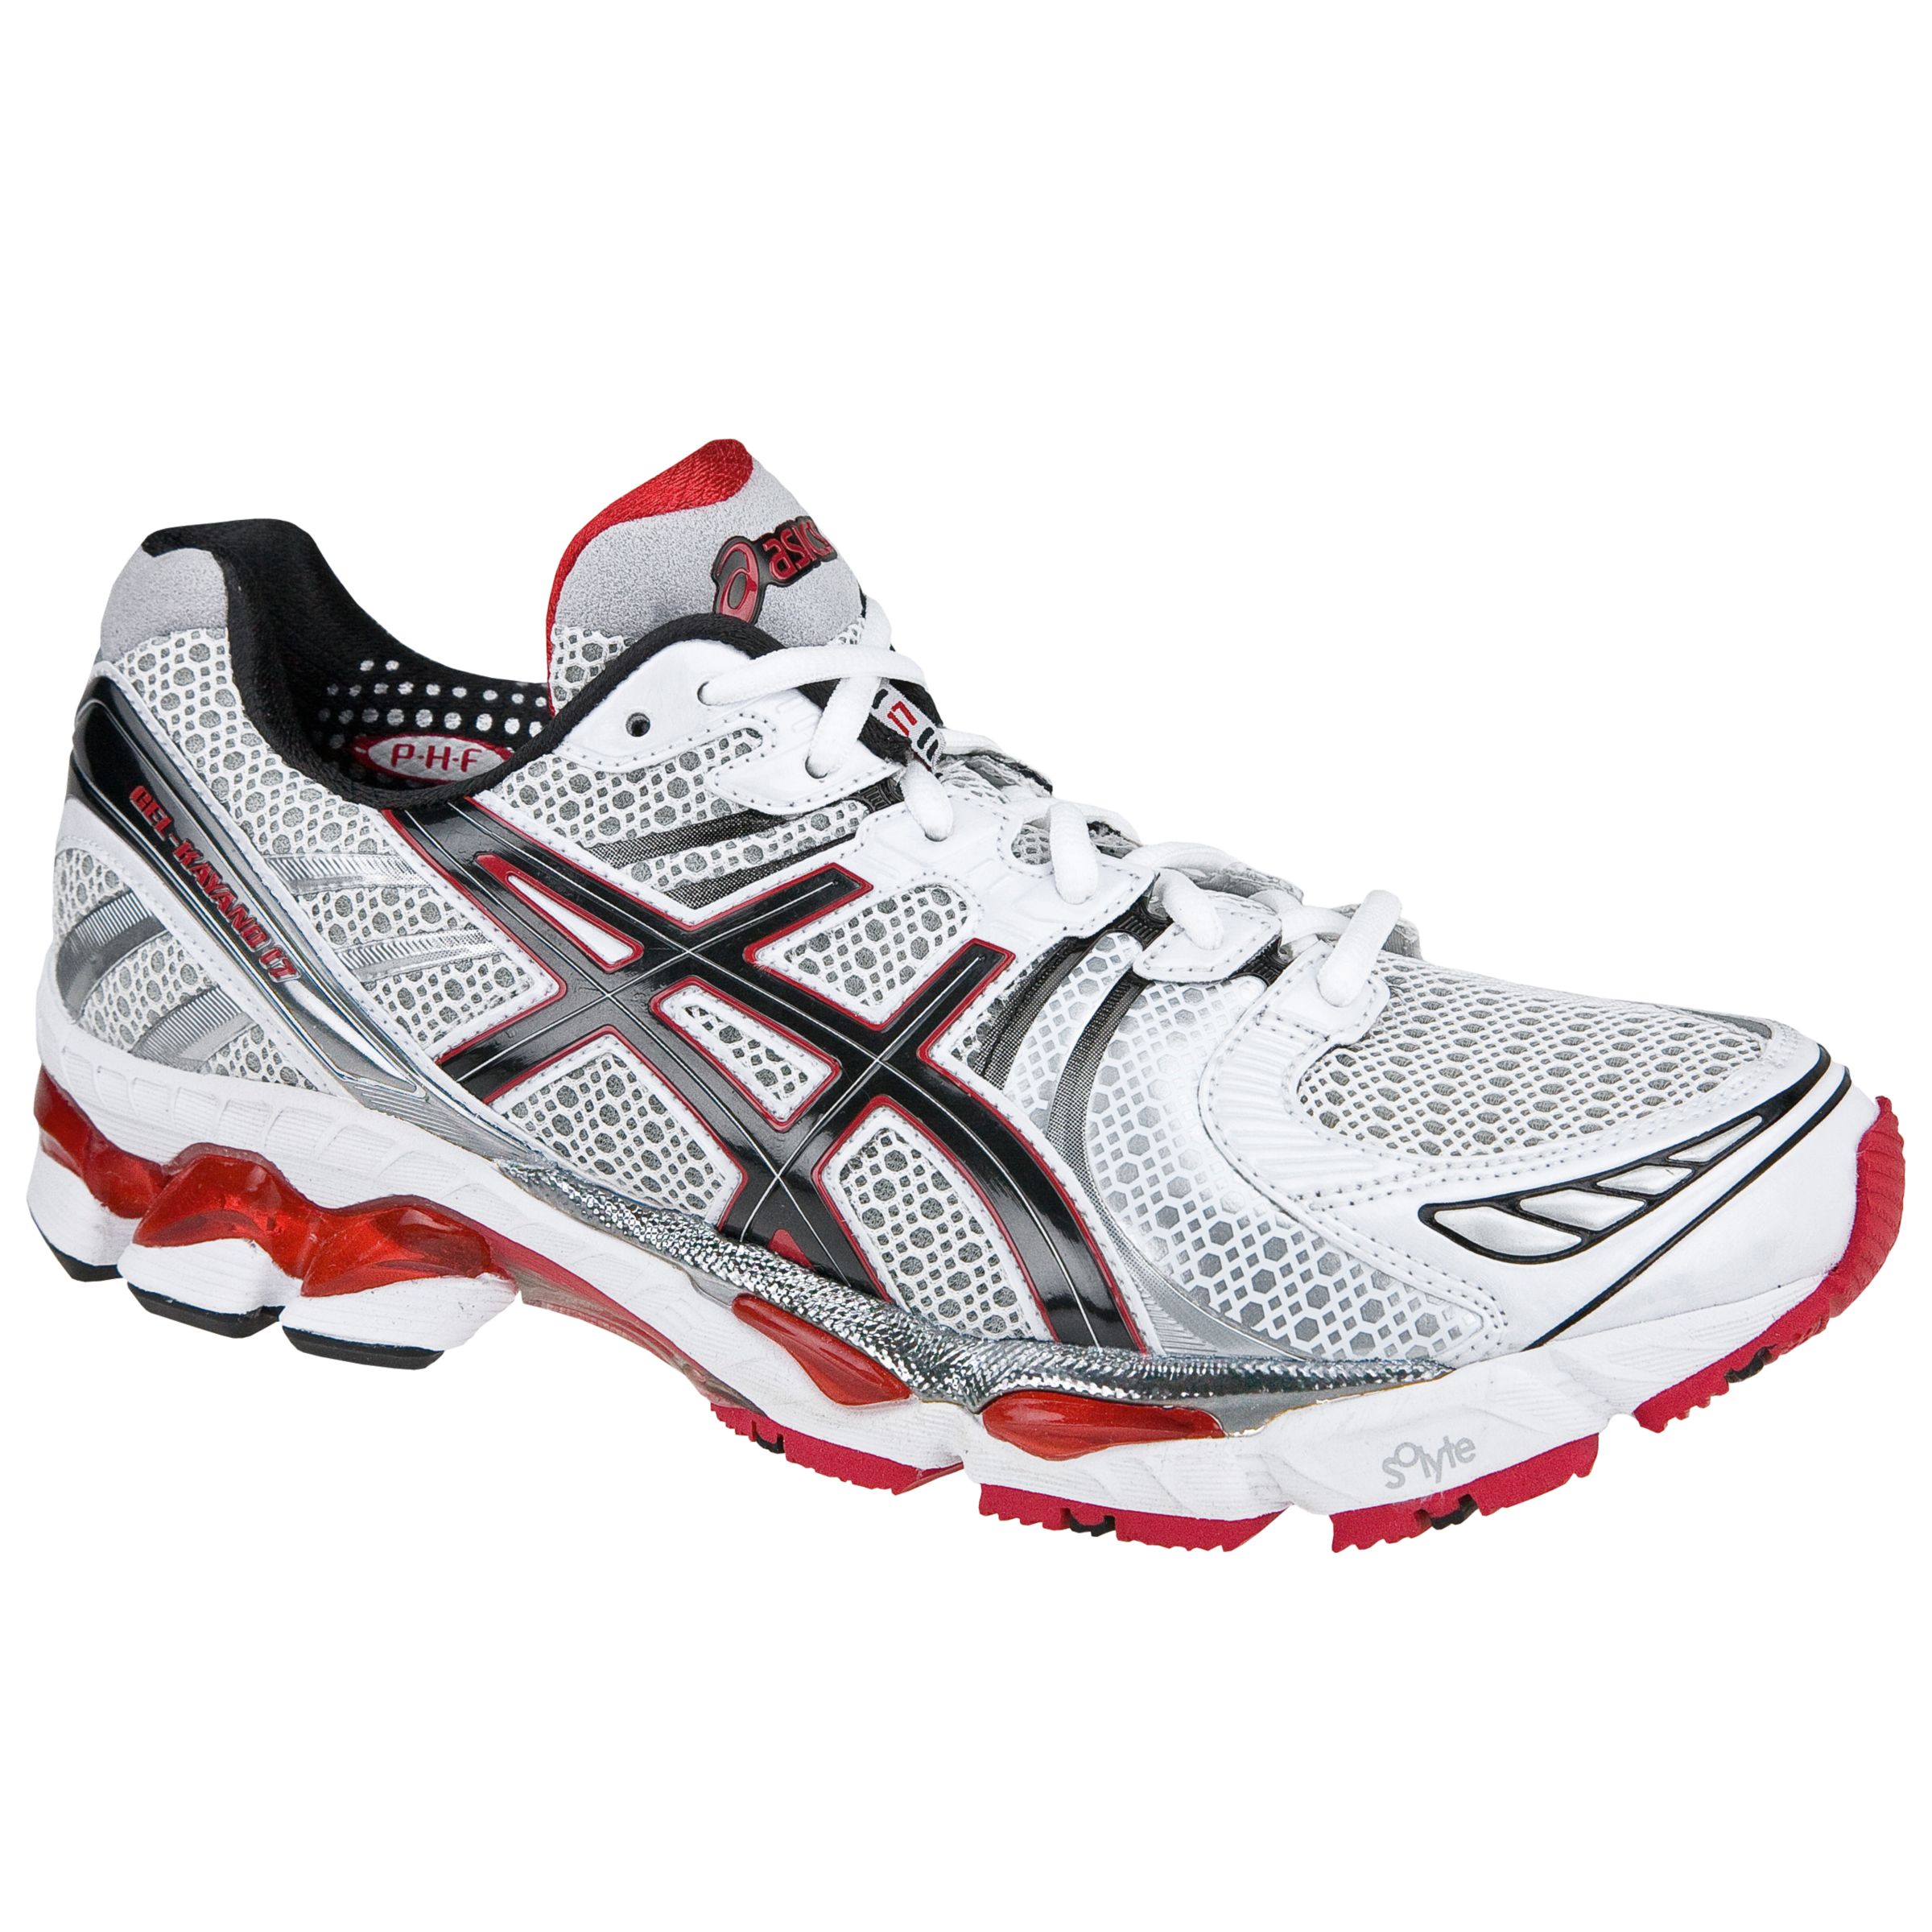 Gel Kayano Structured Running Shoes,